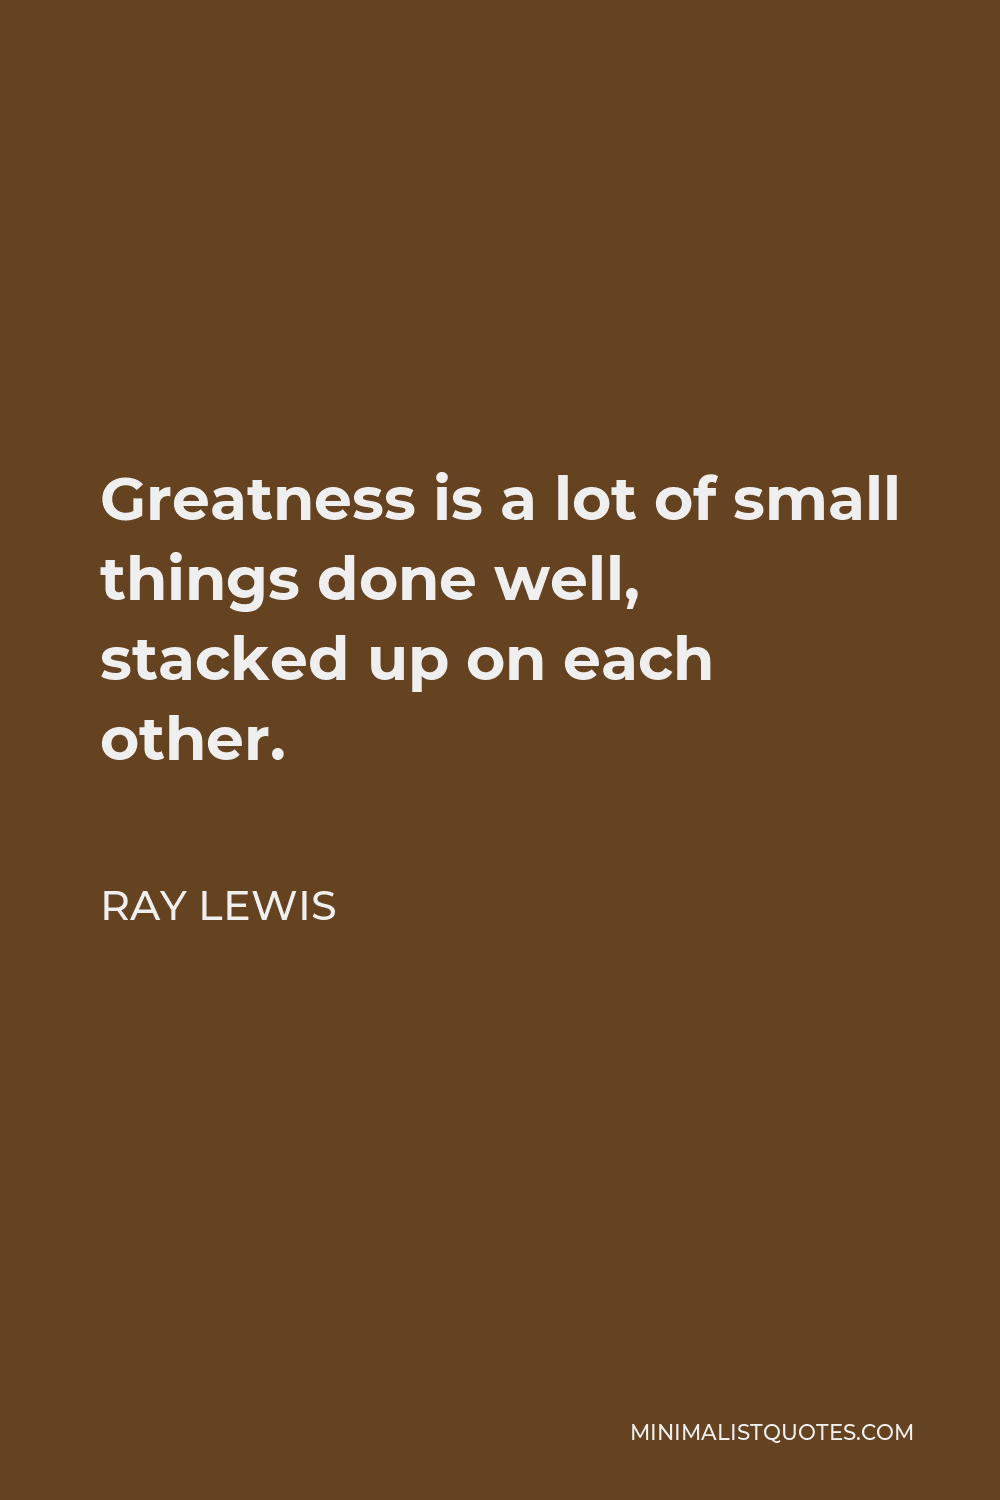 Eric Thomas Quote - Greatness is a lot of small things done well.